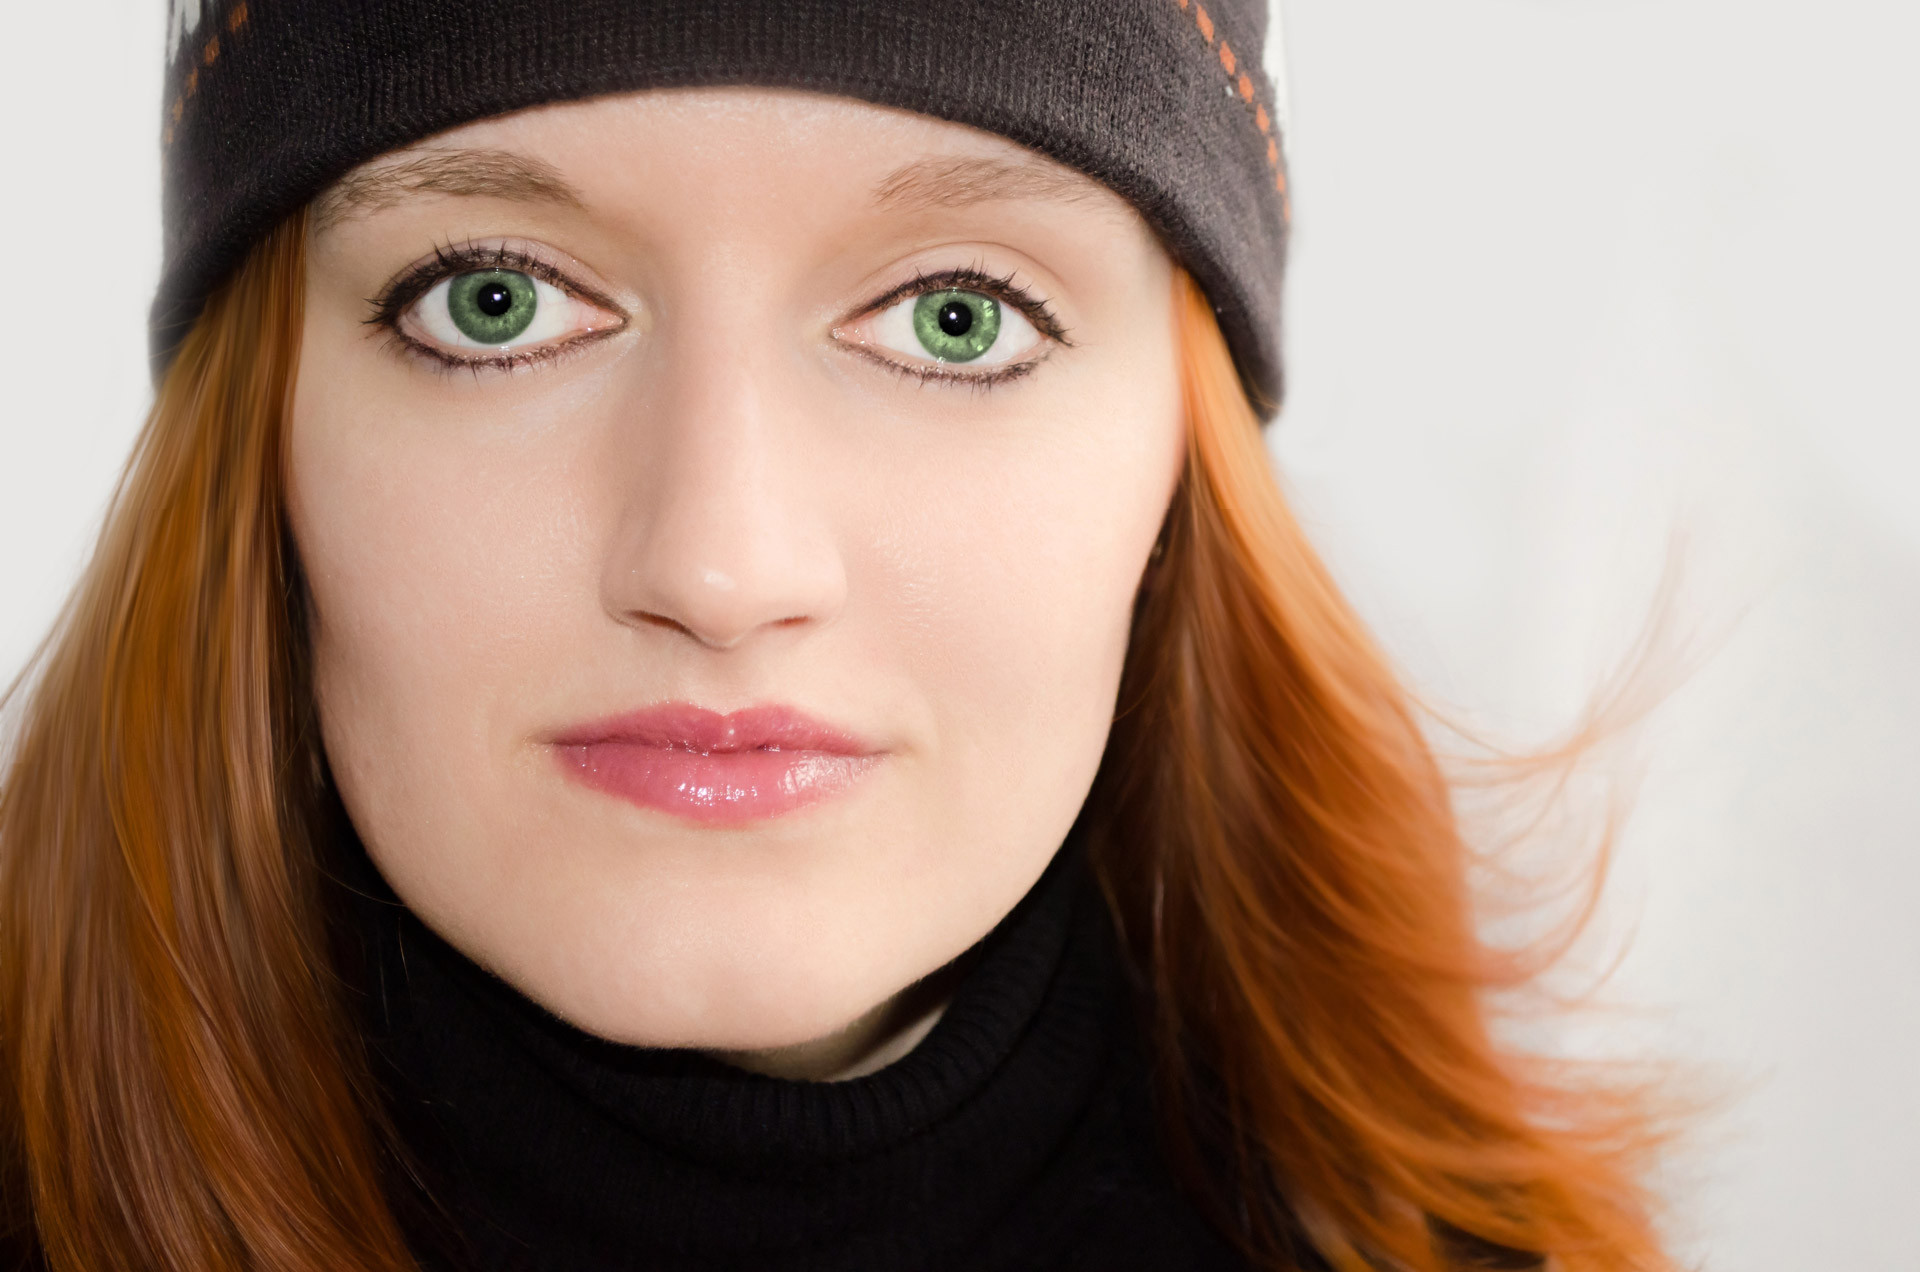 Woman With Green Eyes